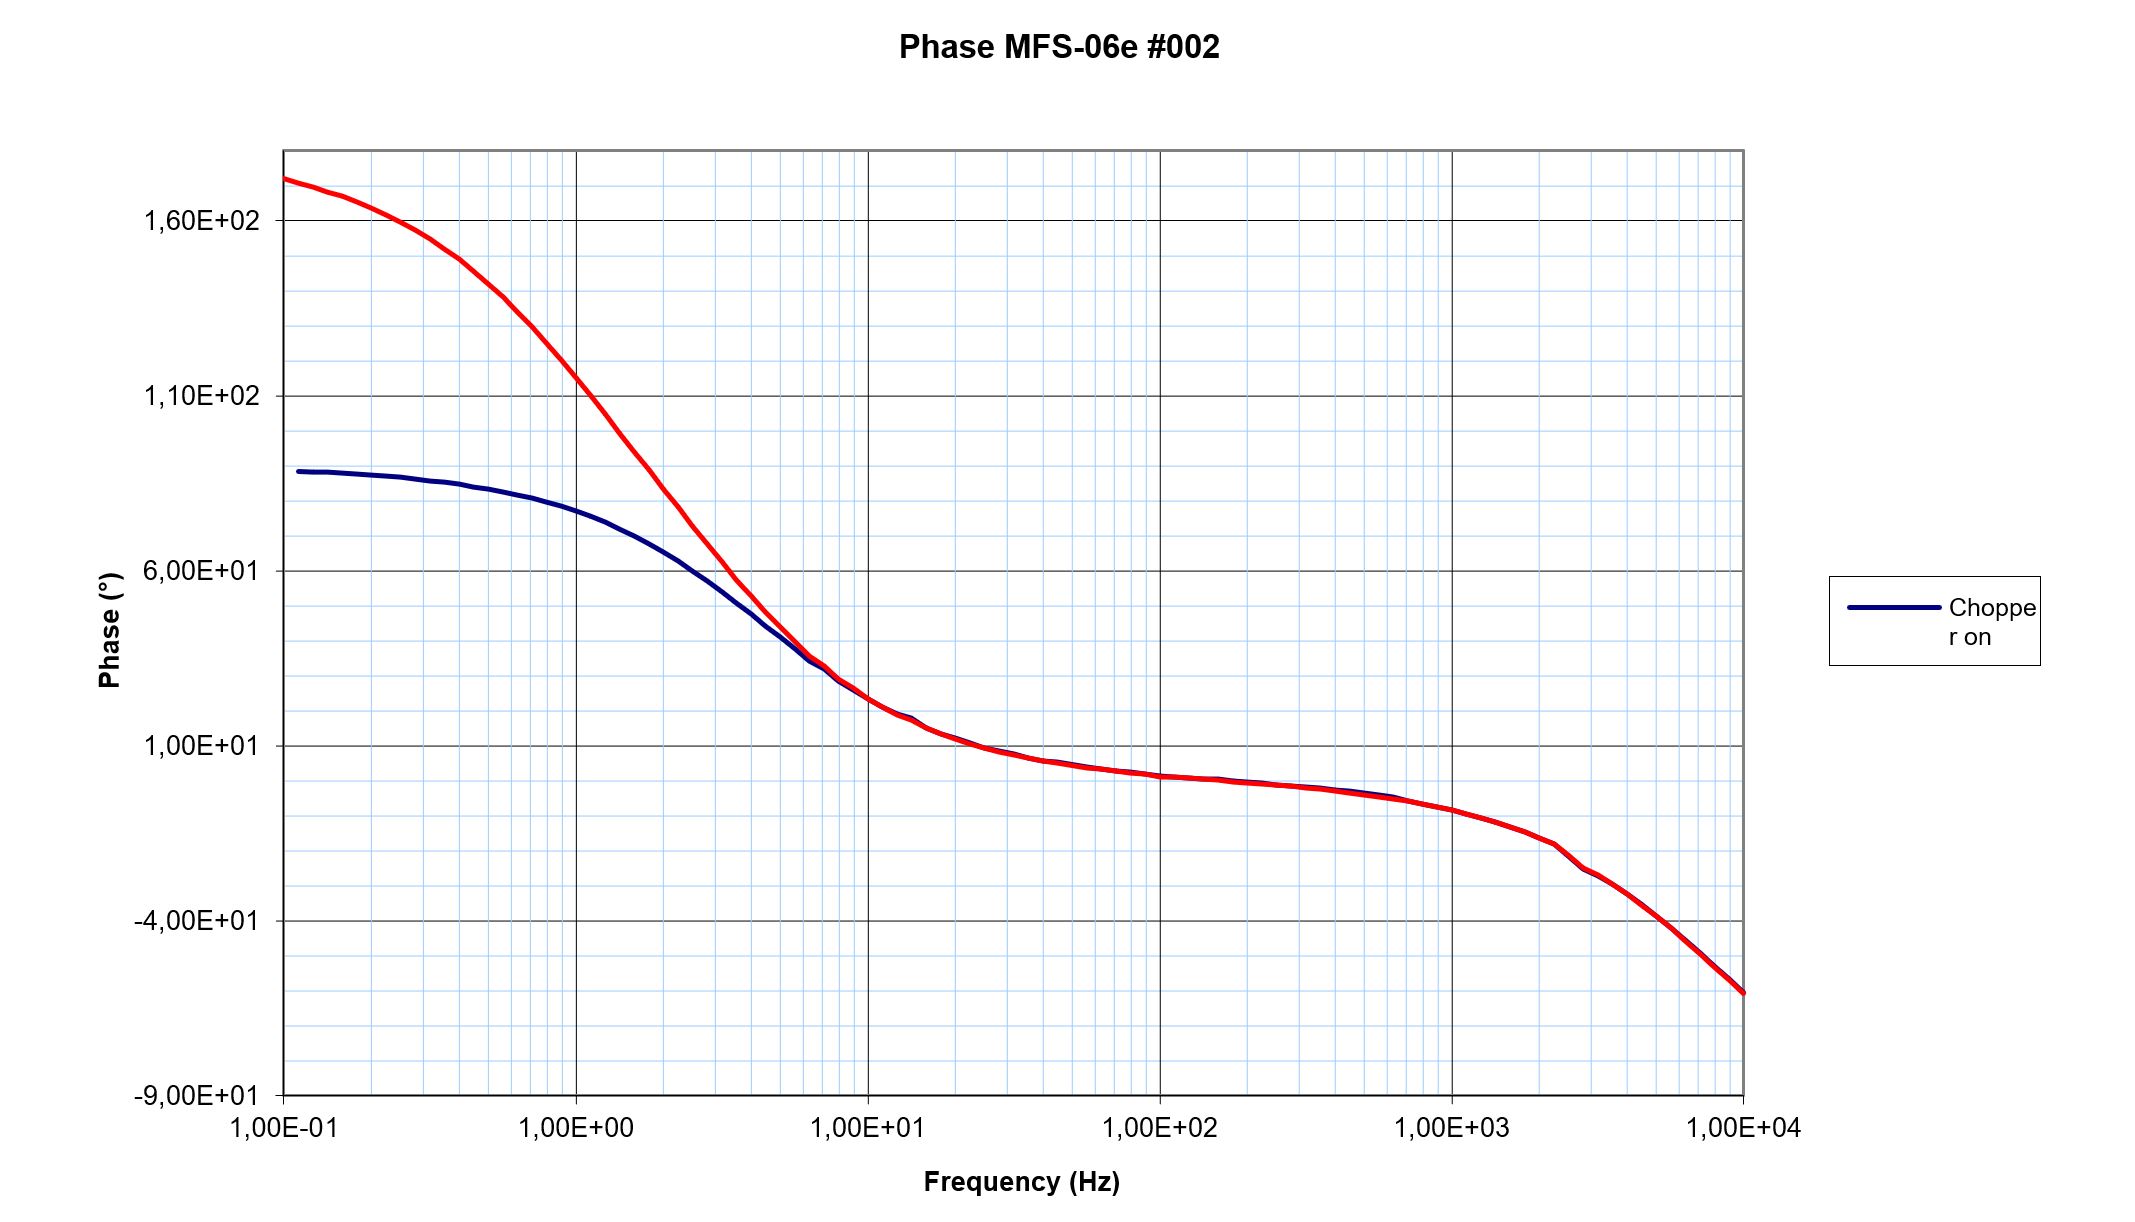 ../../_images/Typical_phase_calibration_curve_of_MFS-06e.jpg